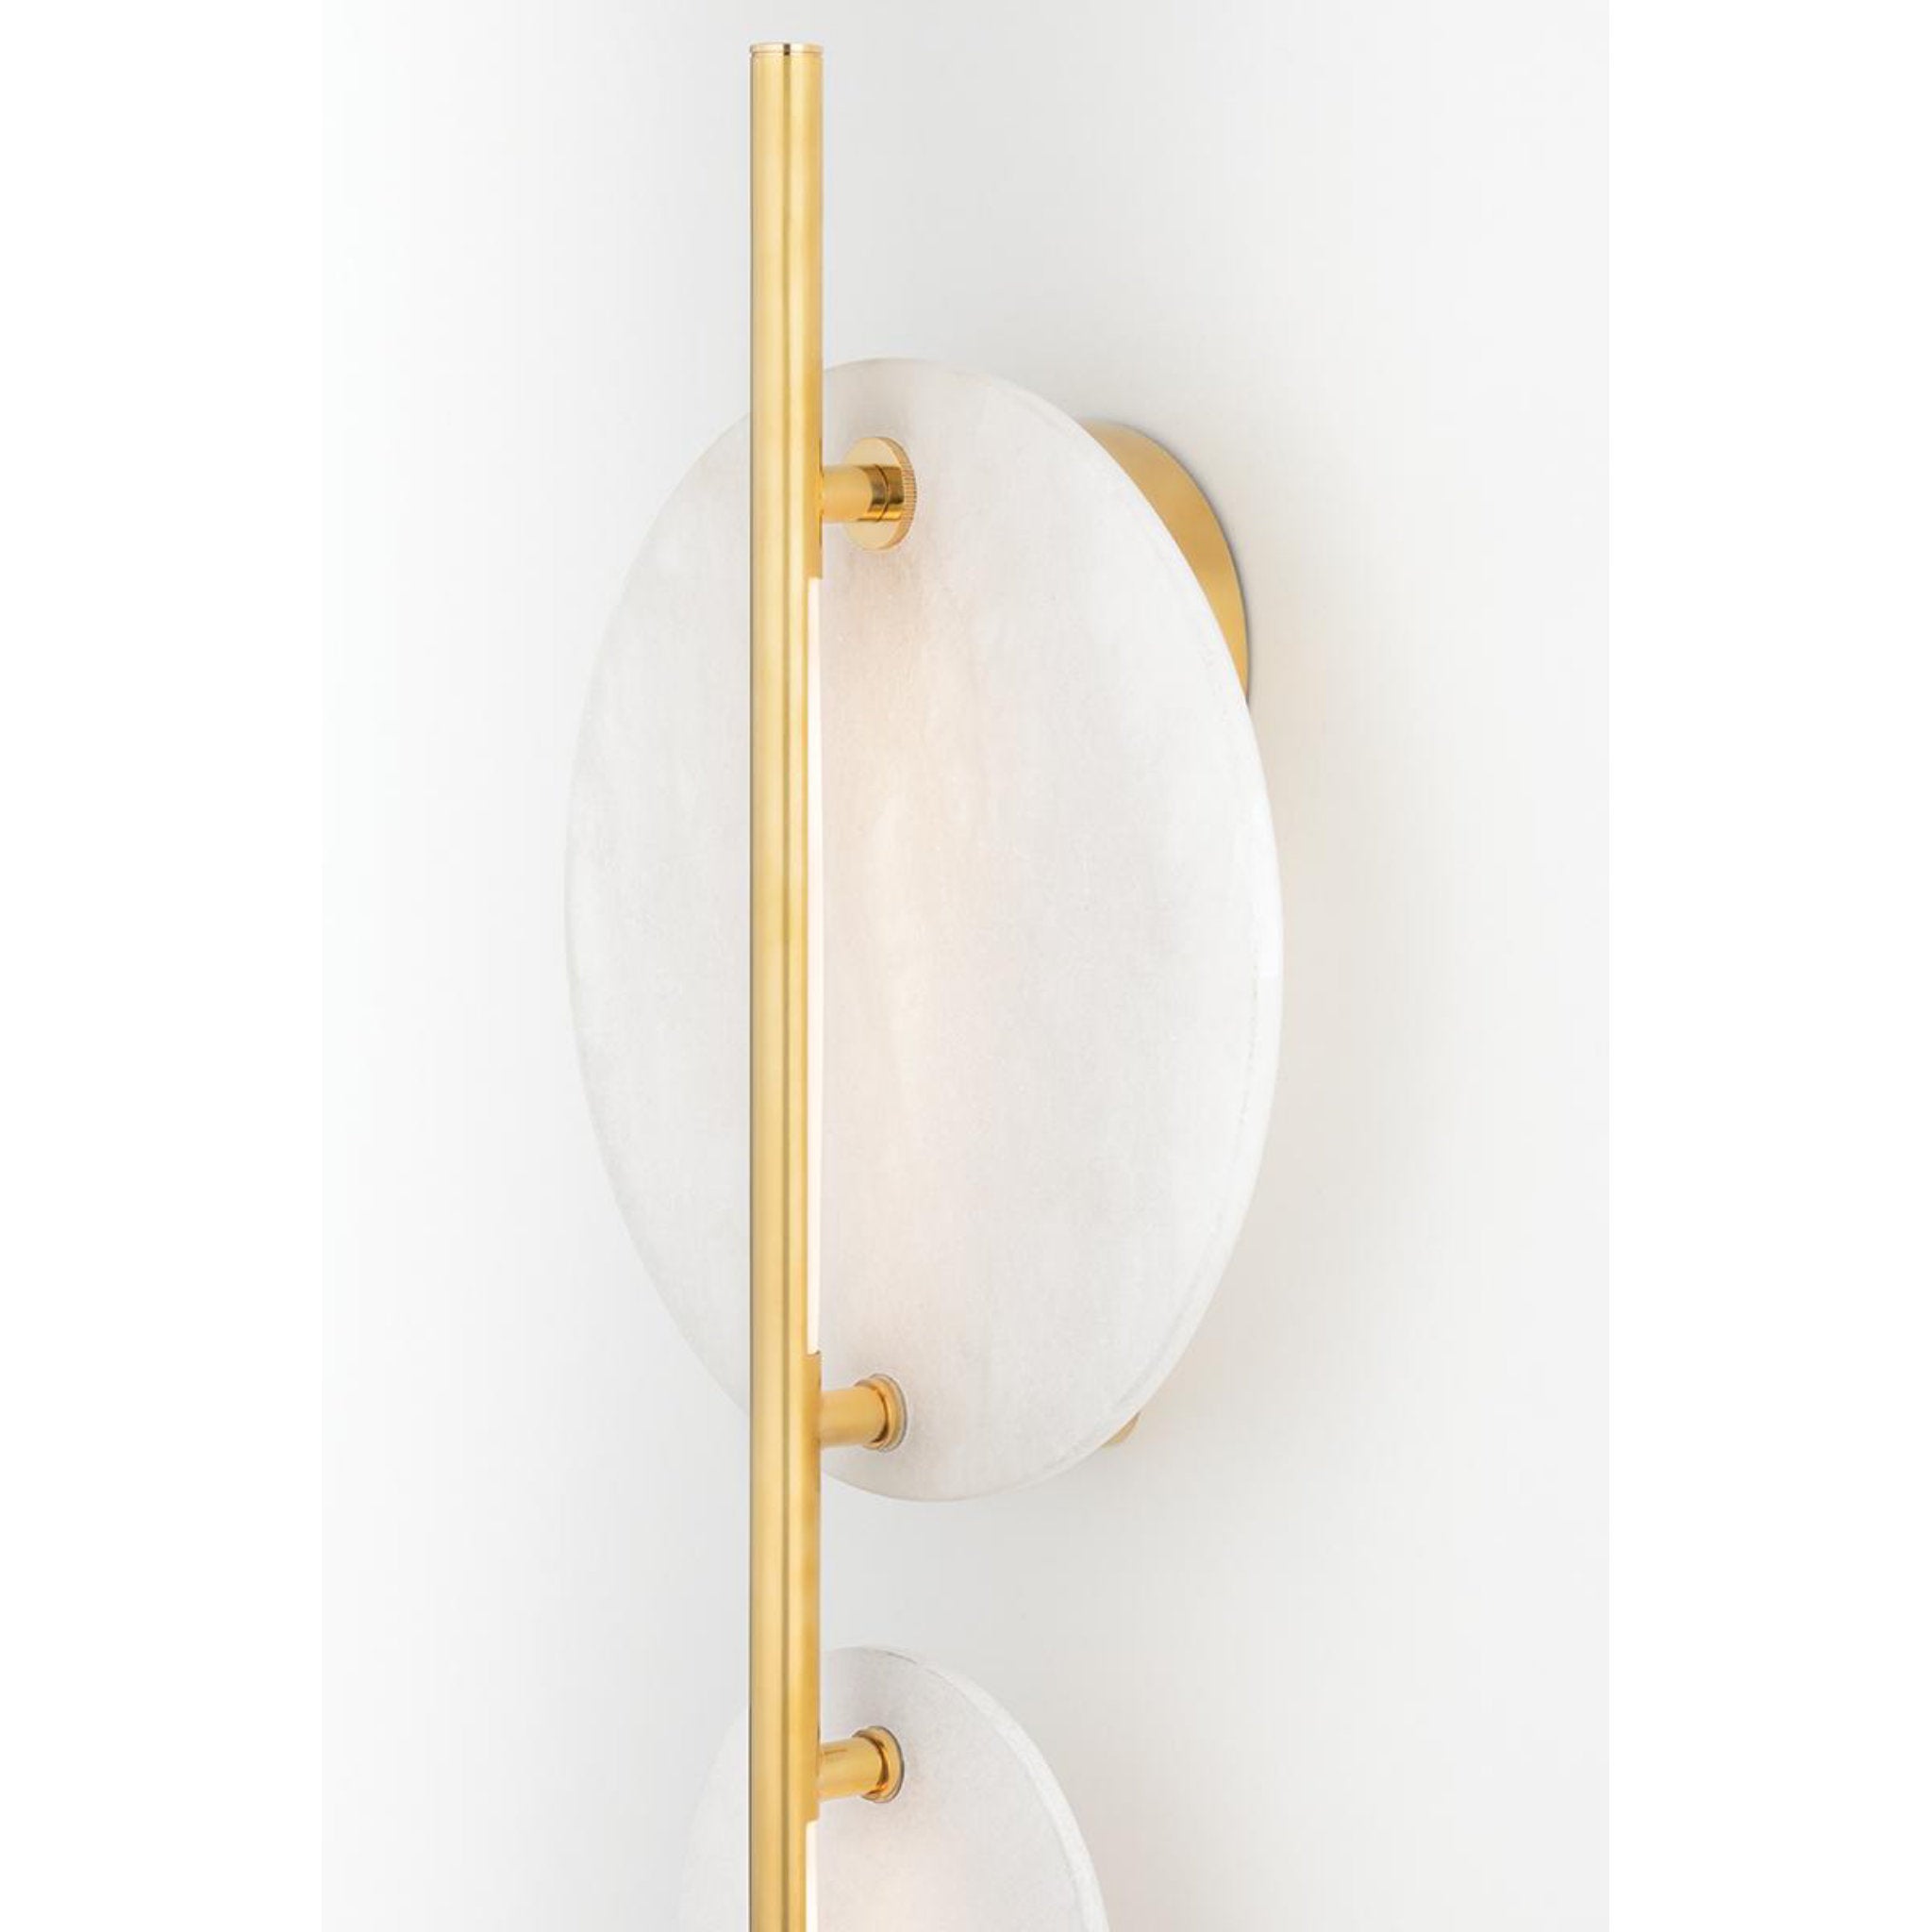 Croft 0 Light Wall Sconce in Aged Brass